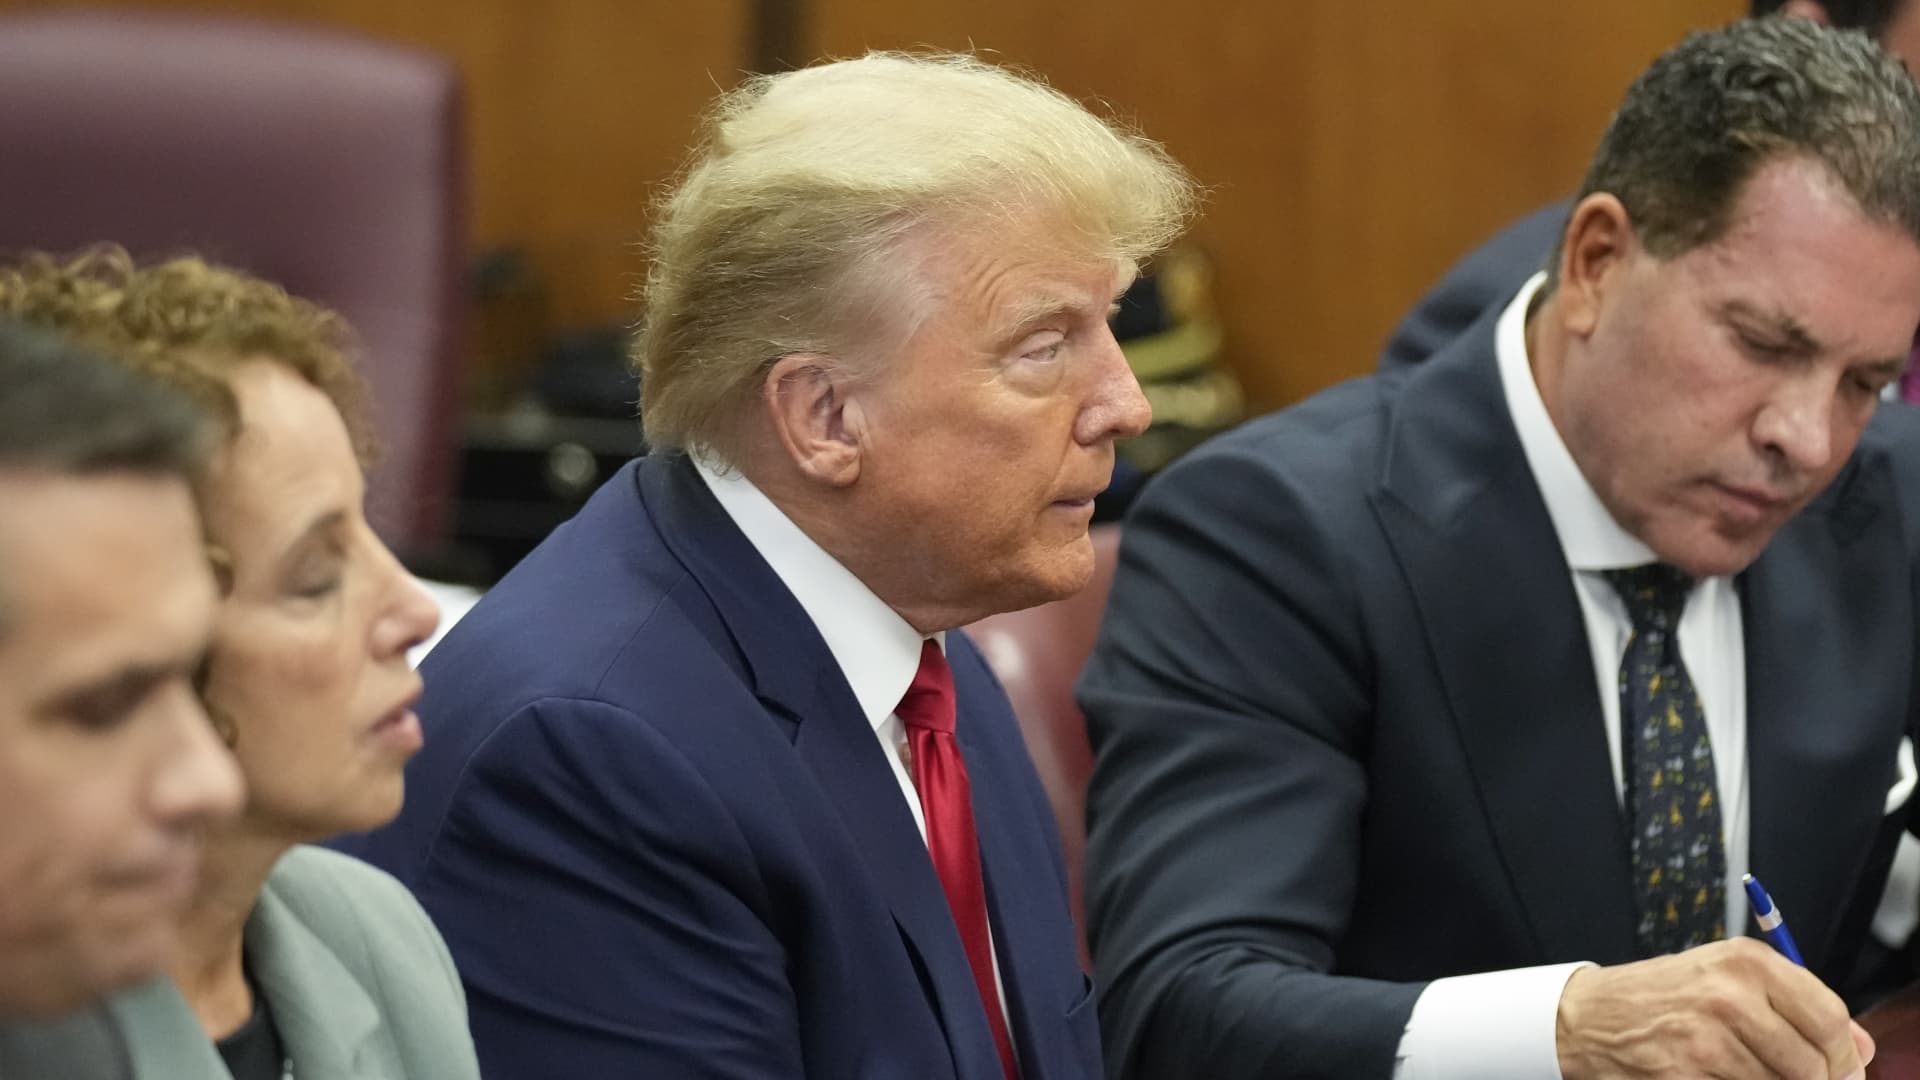 Former U.S. President Donald Trump appears in a Manhattan court during his arraignment on April 4, 2023, in New York City.